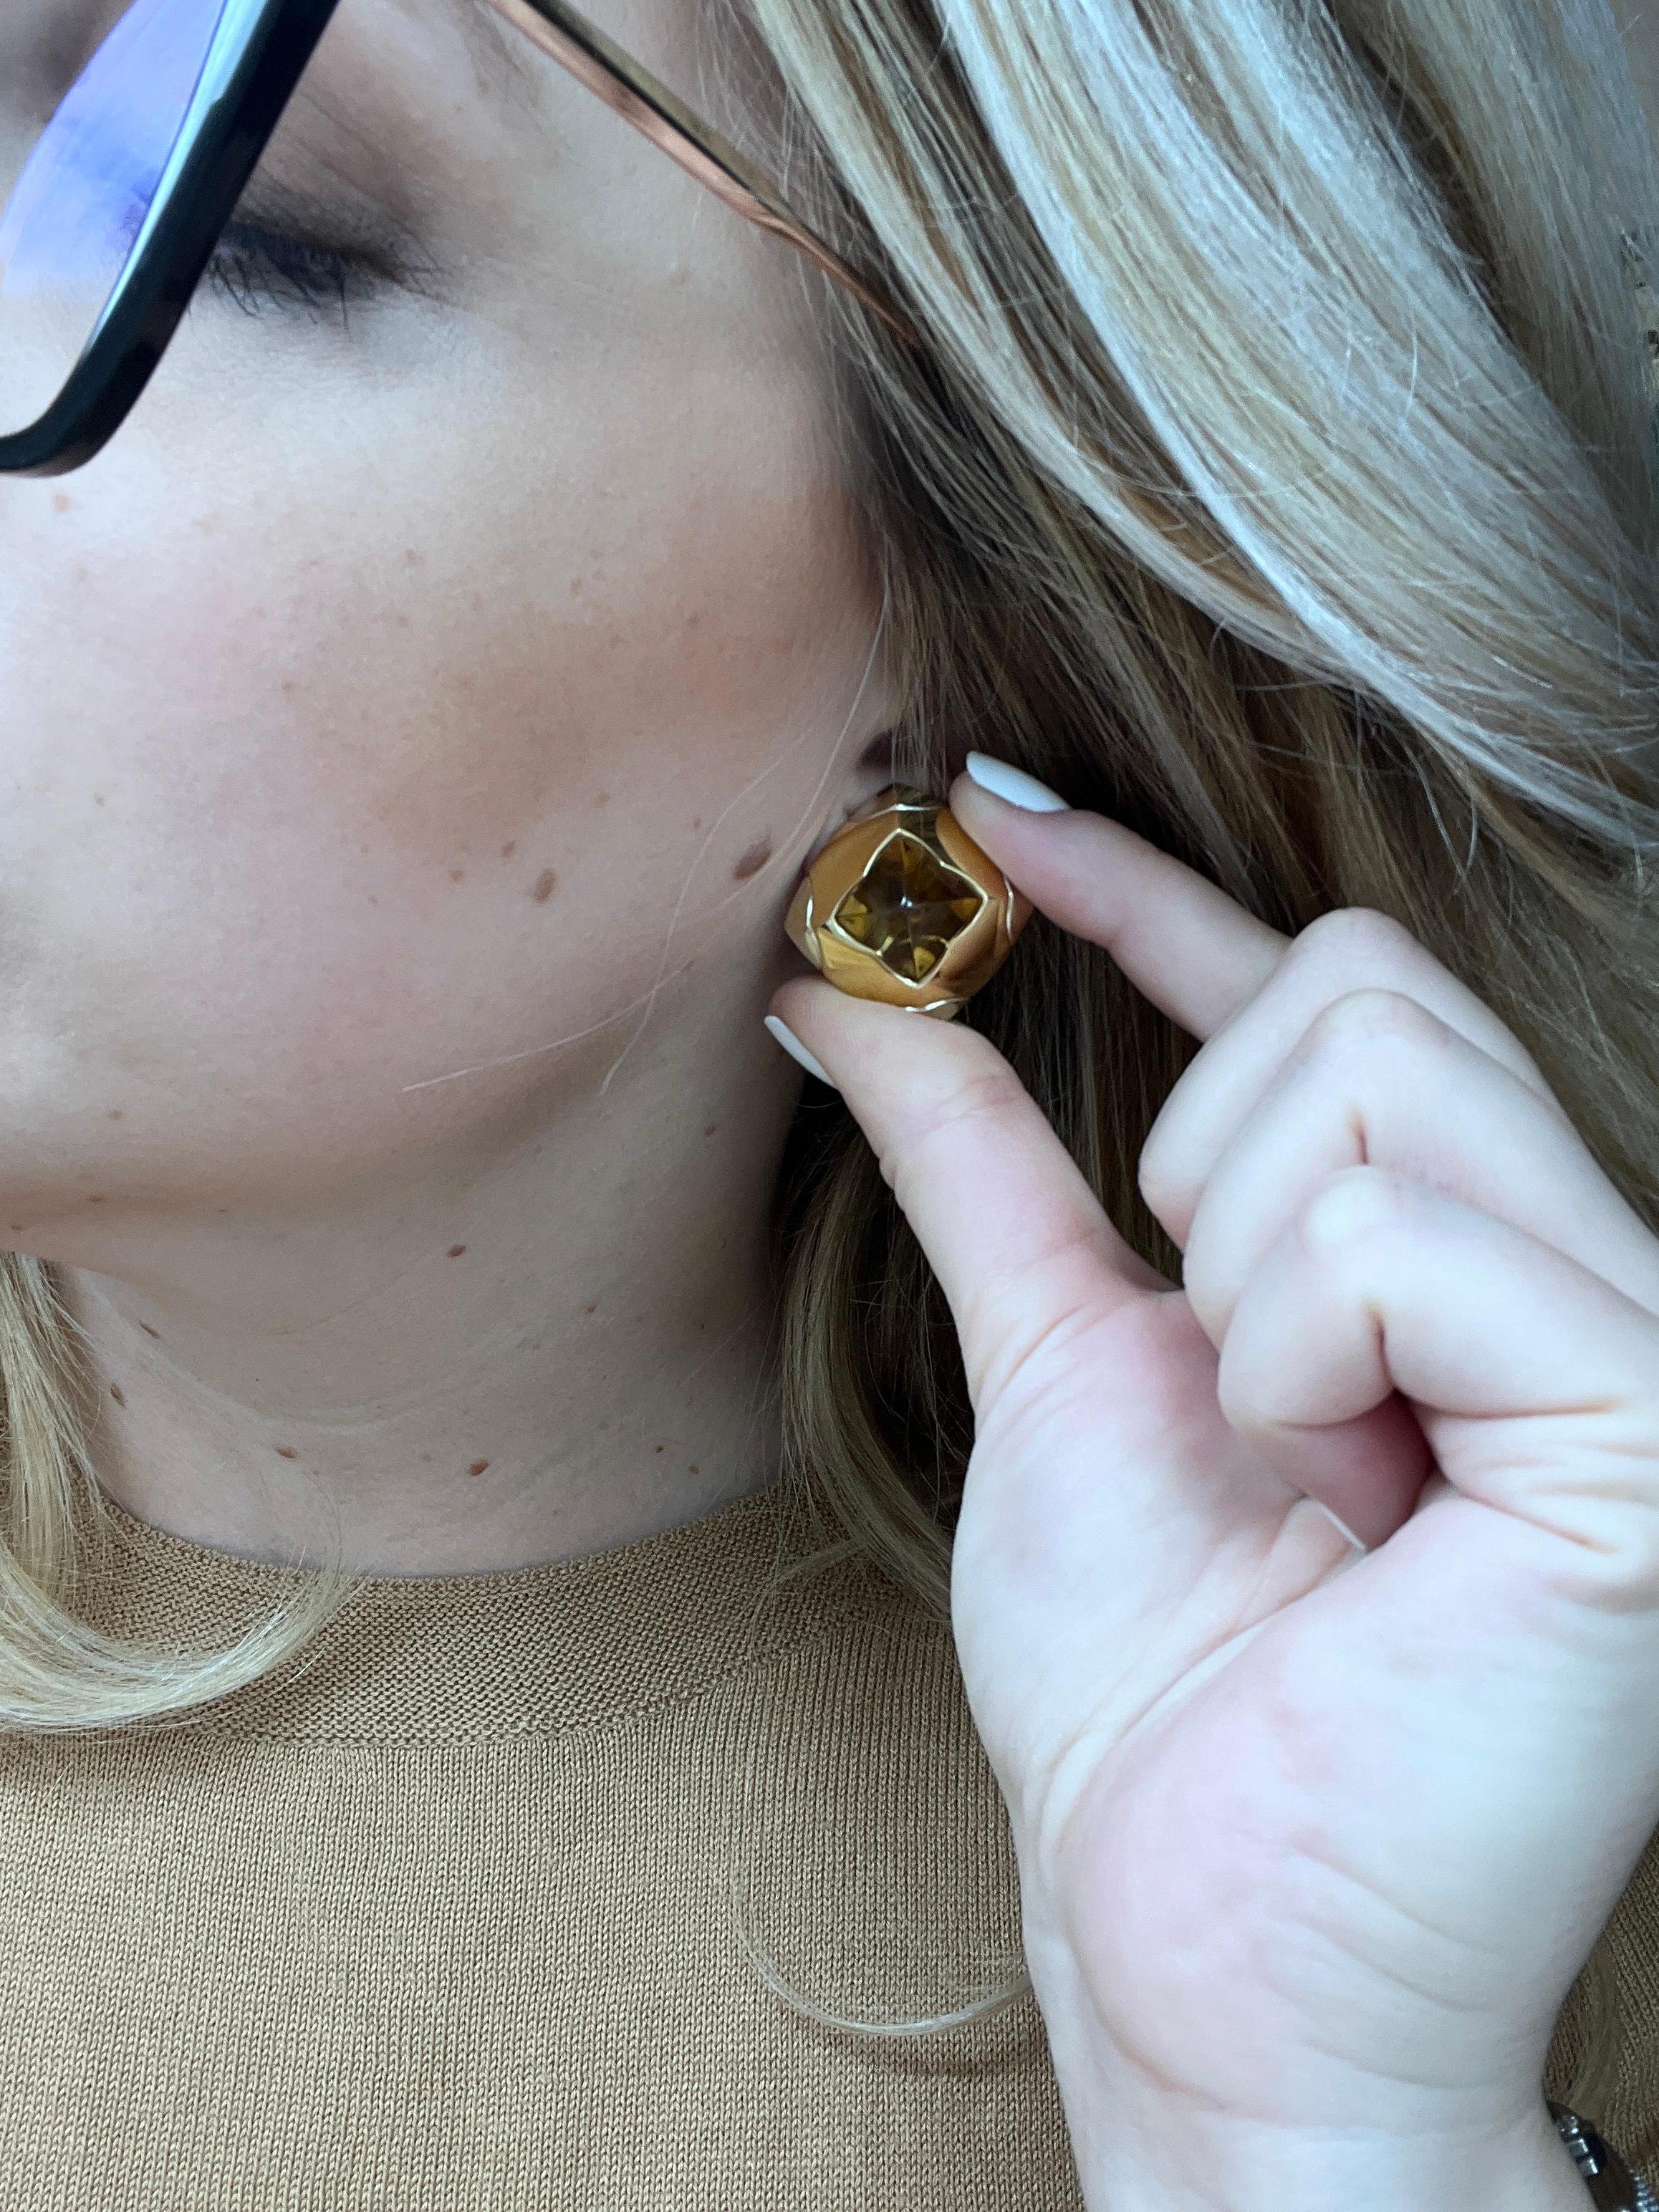 Signed Designer Bulgari Square Earrings 18 Karat Gold Natural Citrine Bvlgari In Excellent Condition For Sale In Carmel-by-the-Sea, CA